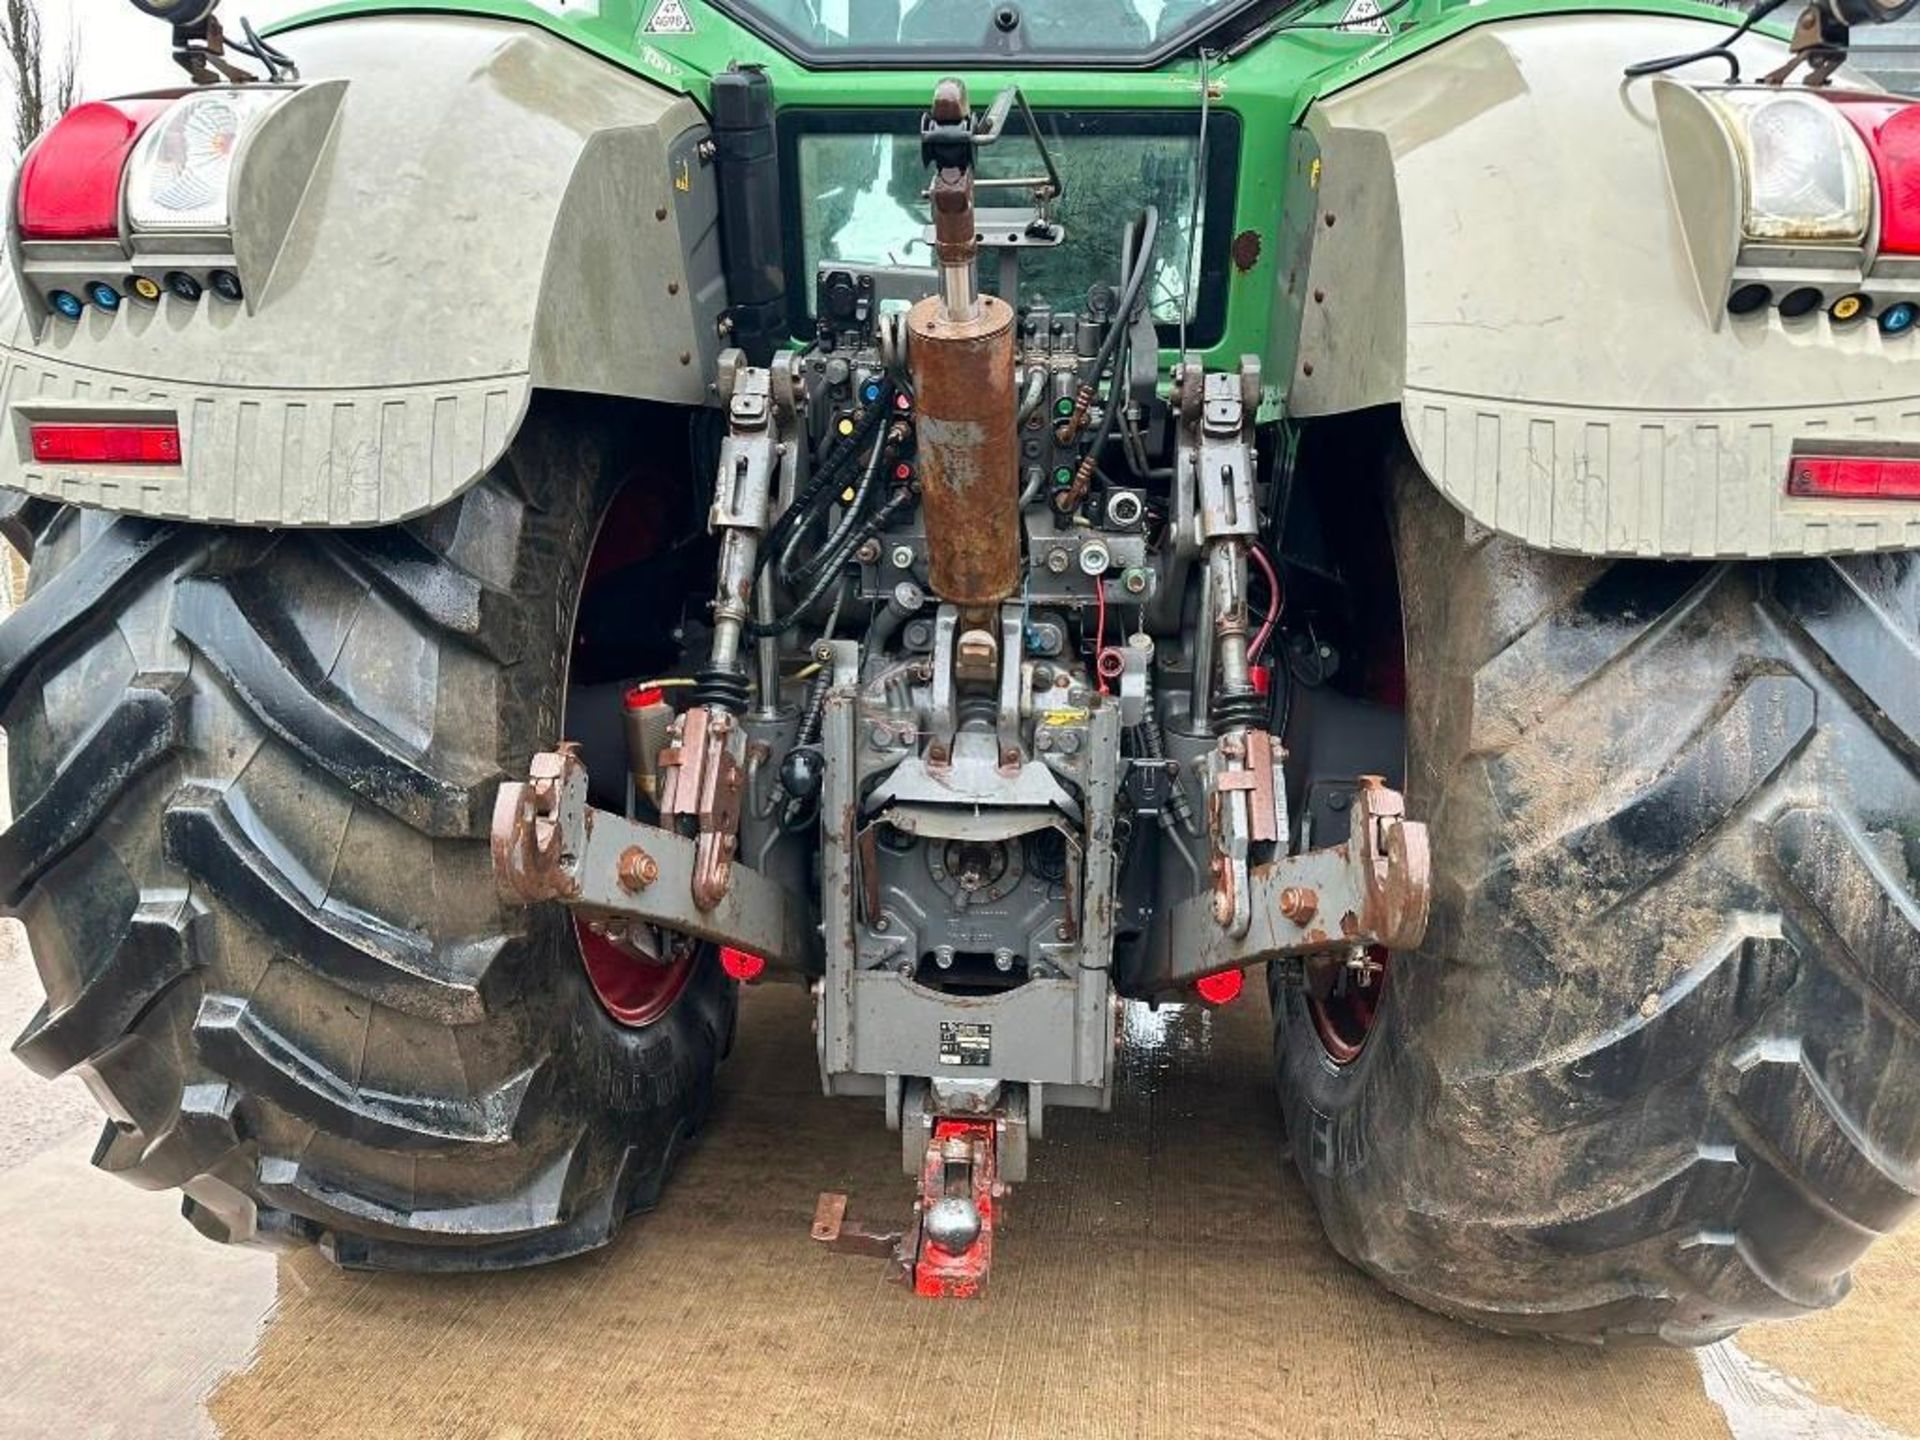 2013 Fendt 828 Vario tractor, 4wd, front linkage, front spool valves, 4No rear spool valves, Bill Be - Image 16 of 23